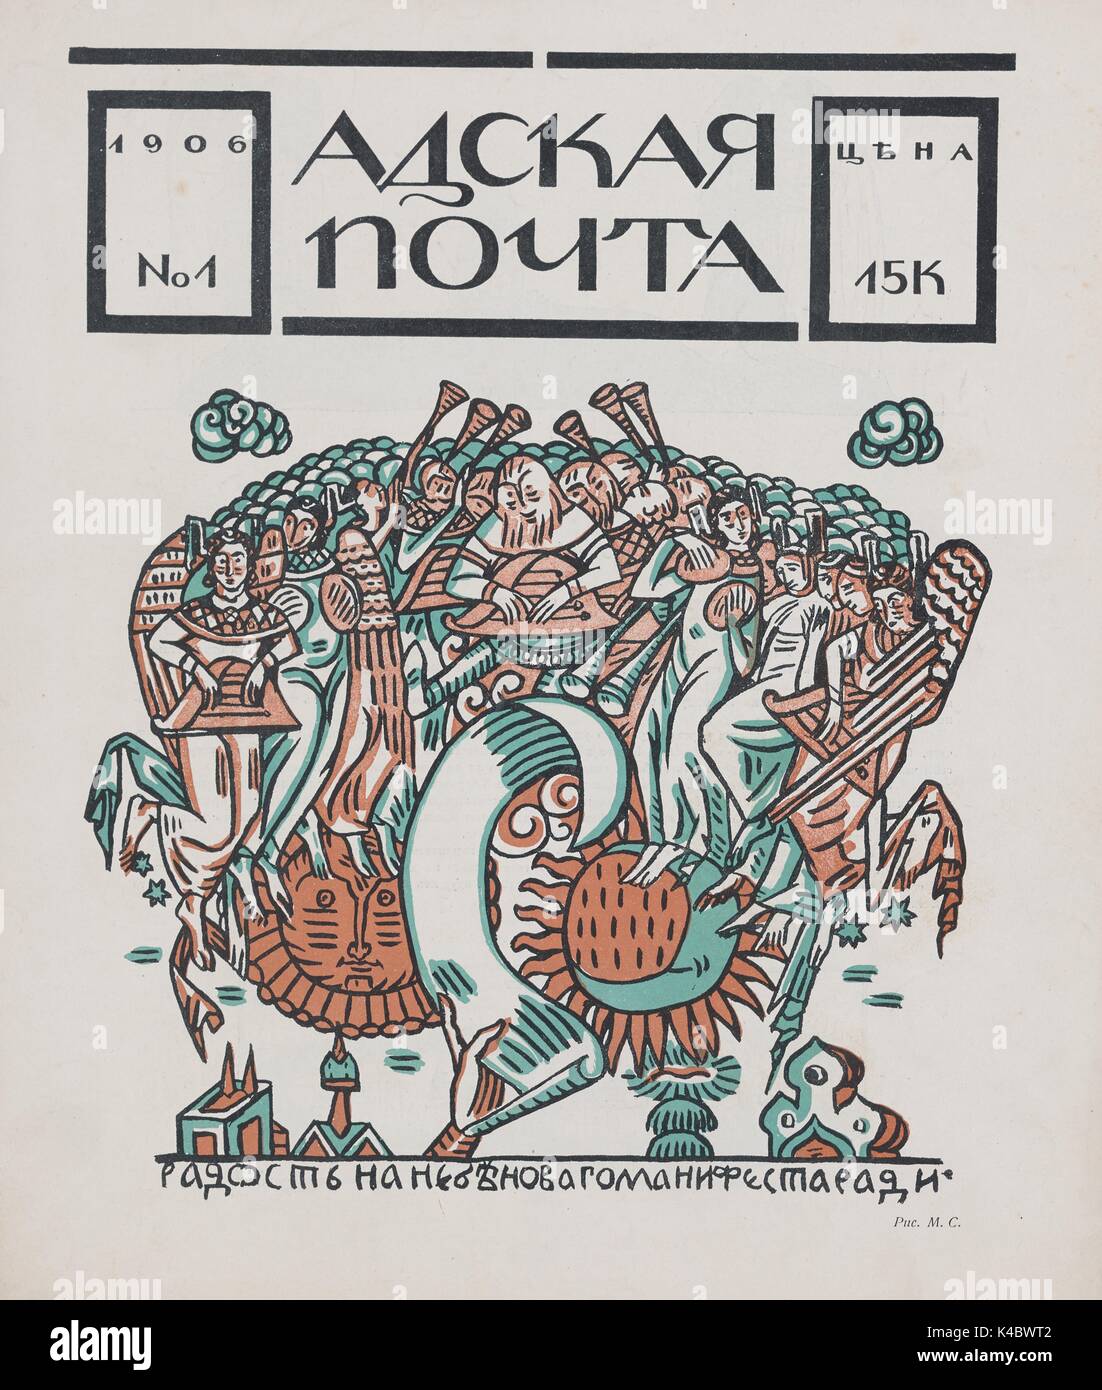 Cover of the Russian satirical journal Adskaia Pochta (Infernal Mail) showing a crowd of people in heaven with musicians playing trumpets and lyres, with text reading 'The joy in heaven for the sake of the new manifesto', referring to the October Manifesto, August 3, 2017. Stock Photo